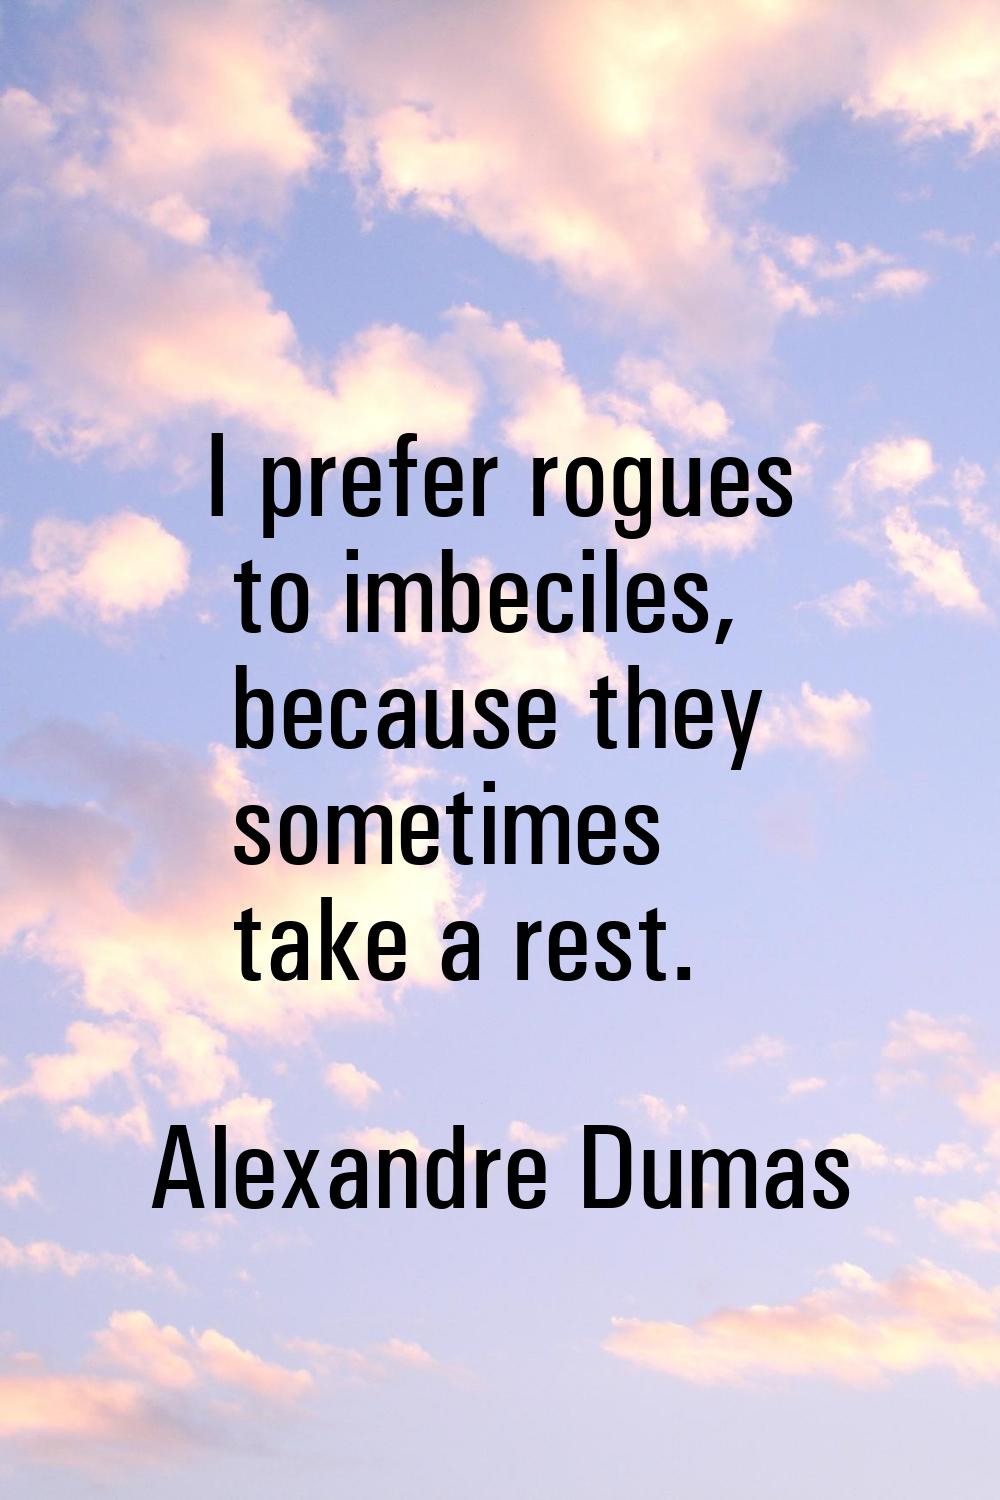 I prefer rogues to imbeciles, because they sometimes take a rest.